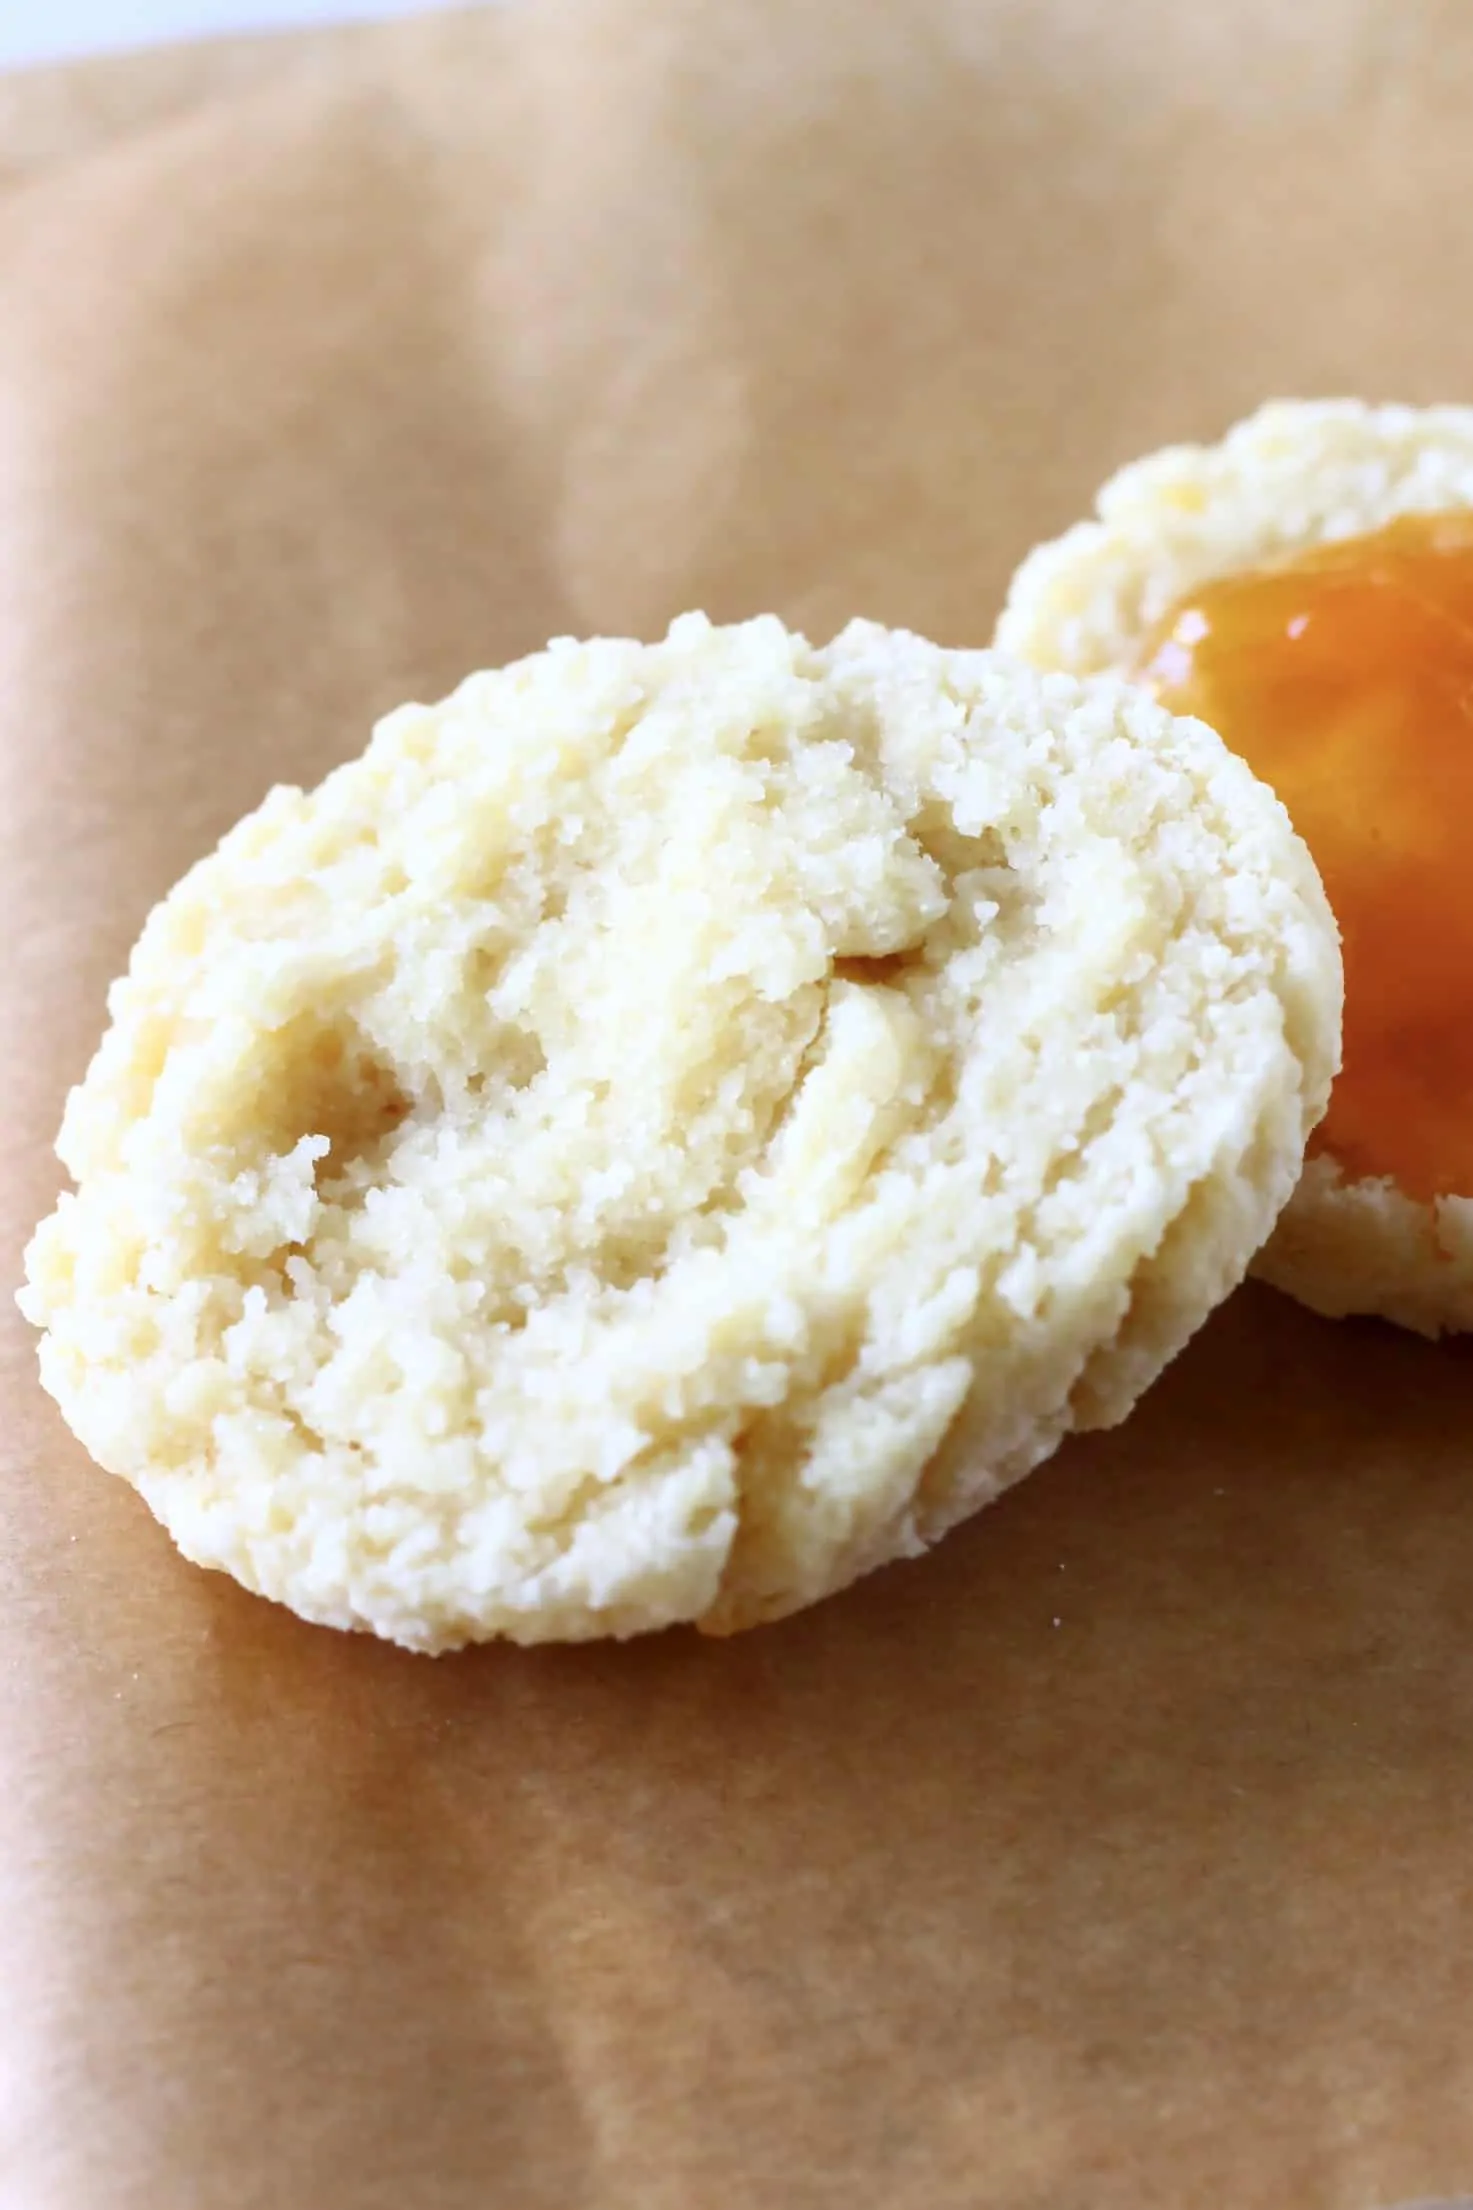 A halved gluten-free vegan biscuit with one half spread with apricot jam